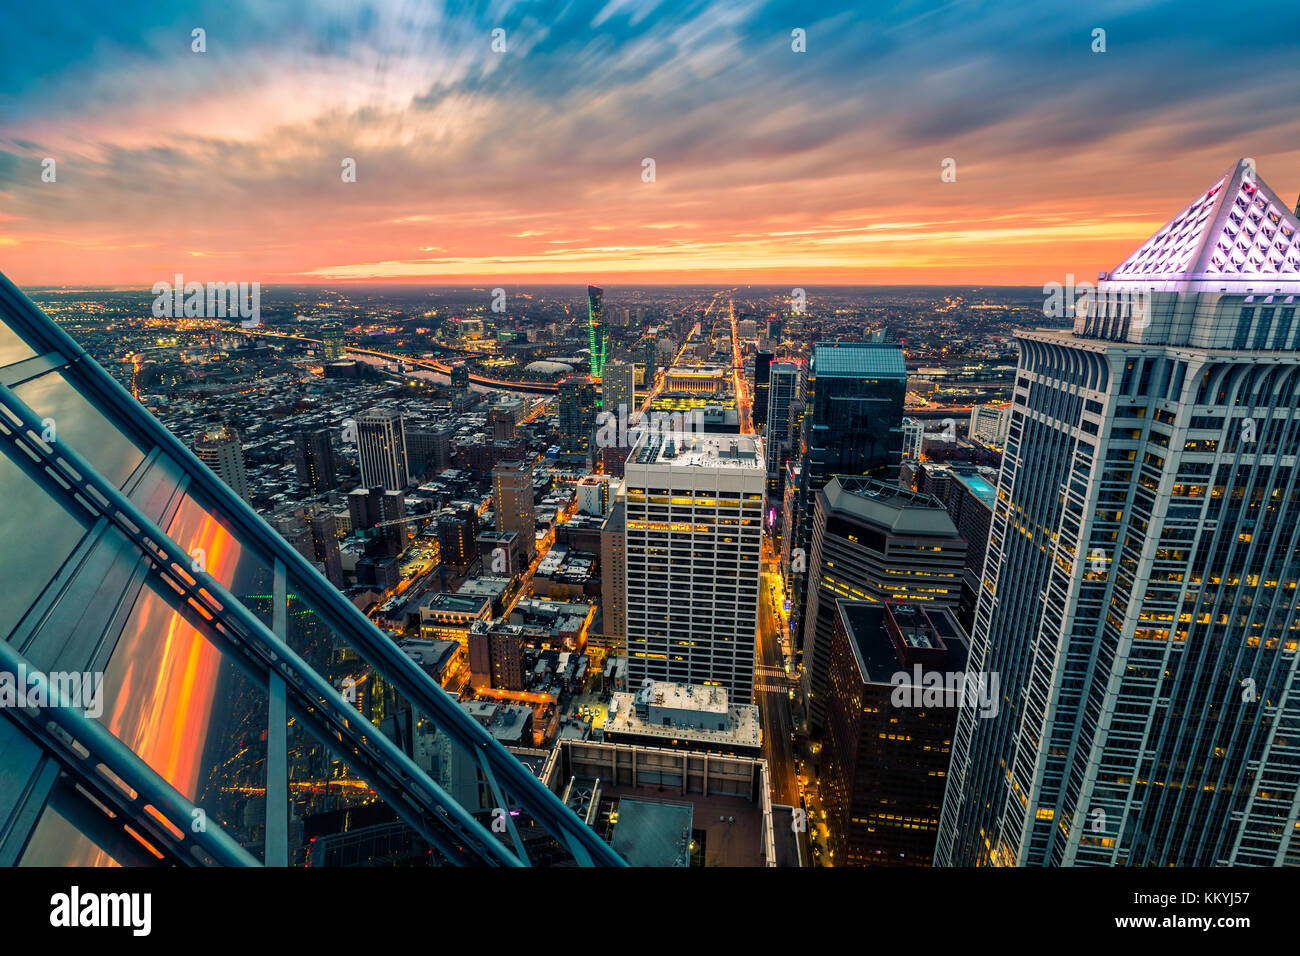 Philadelphia aerial perspective at sunset. Stock Photo